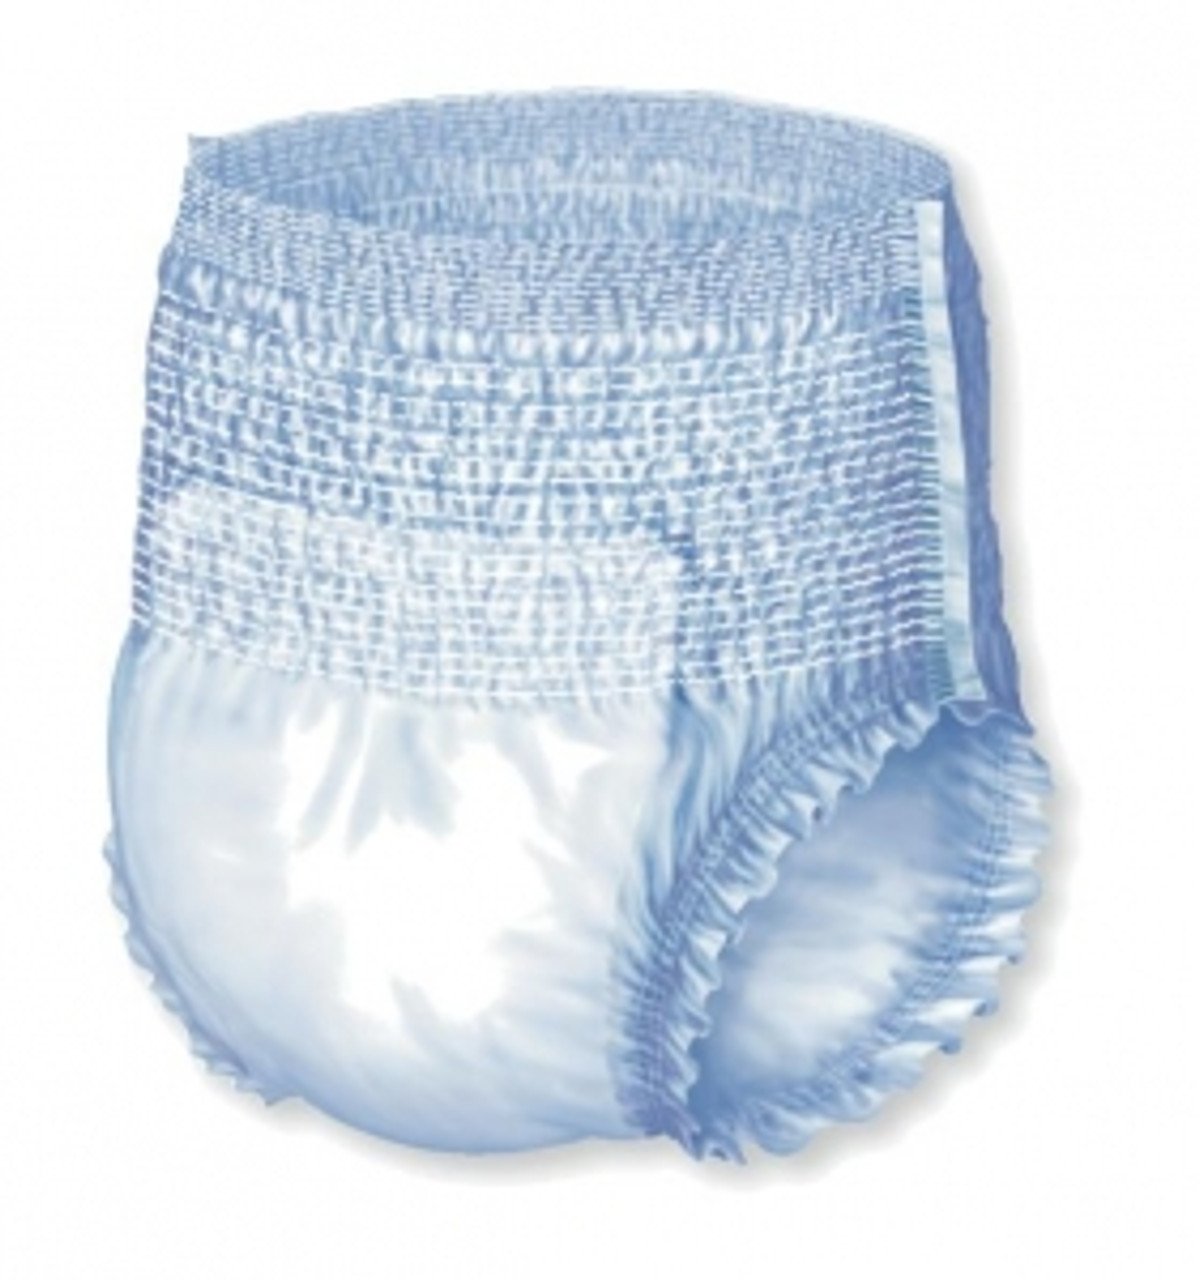 Medline MSC23001A DryTime Disposable Protective Youth Underwear (Pack of 60),Small/Medium,40-70lbs